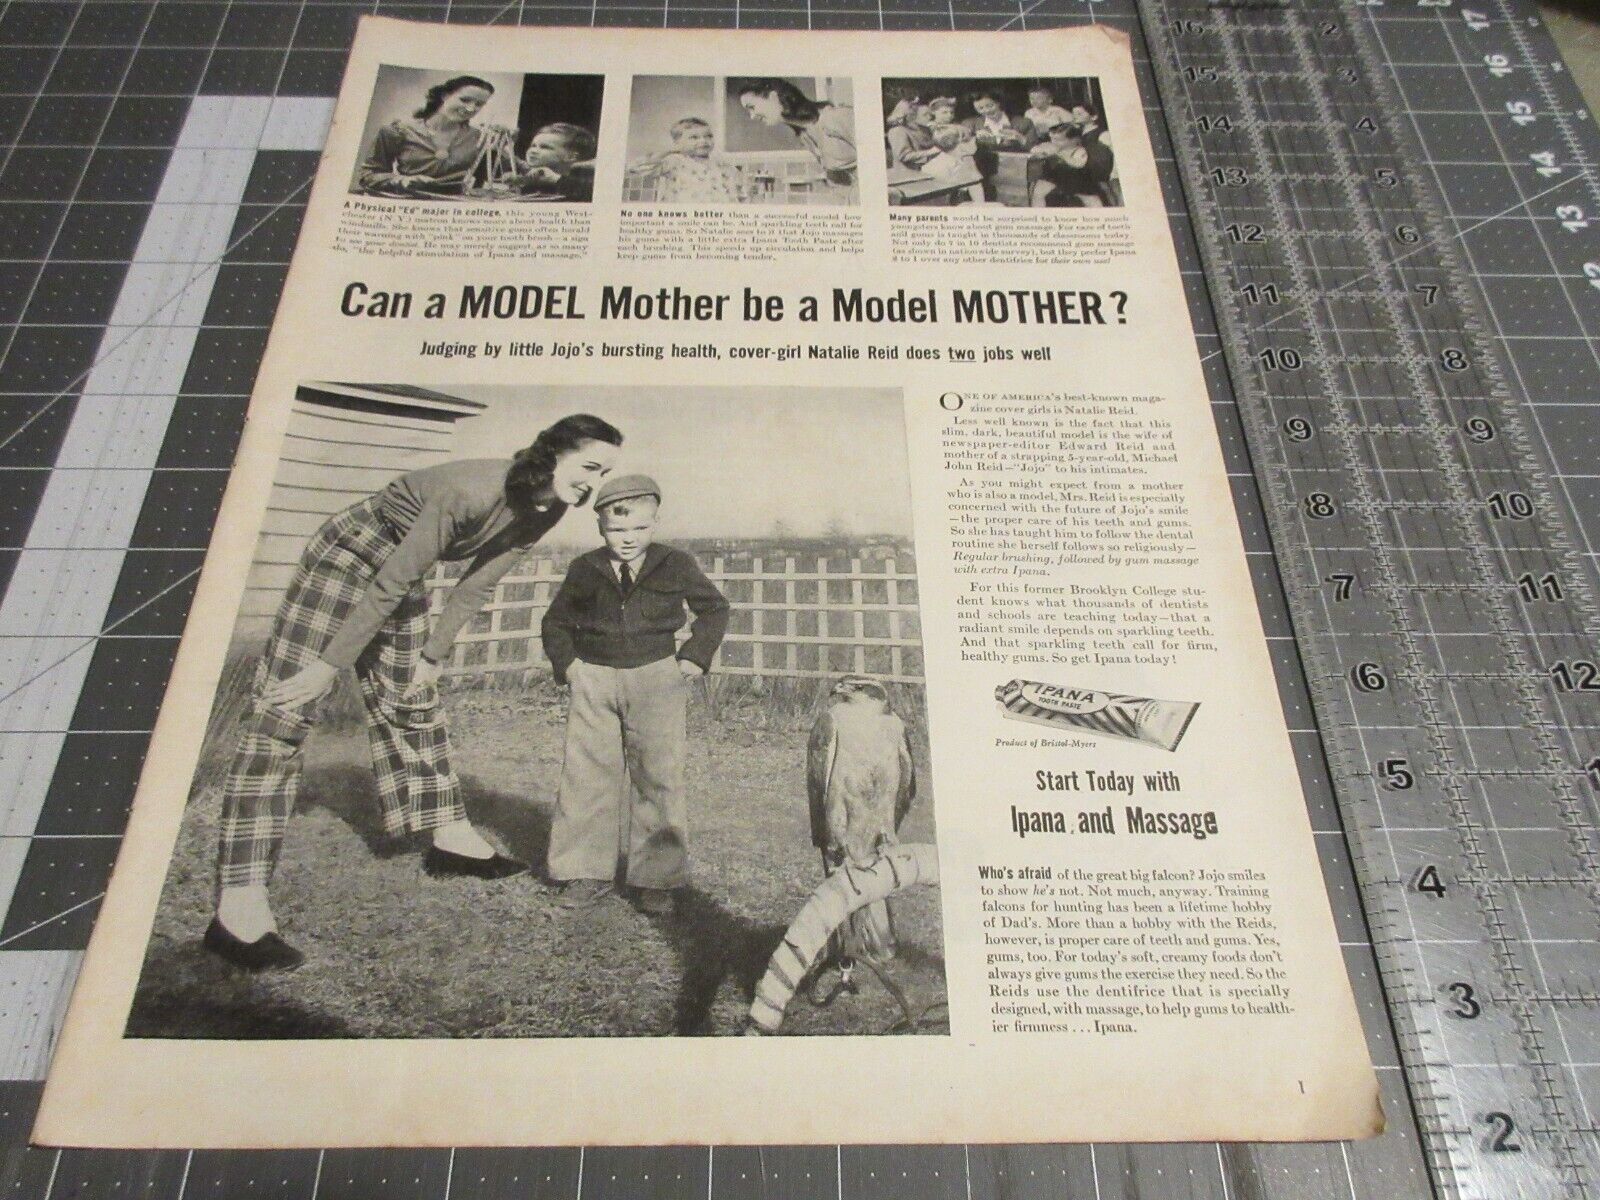 1946 Model Mother be a Model Mother, Natalie Reid, IPANA Toothpaste Print Ad